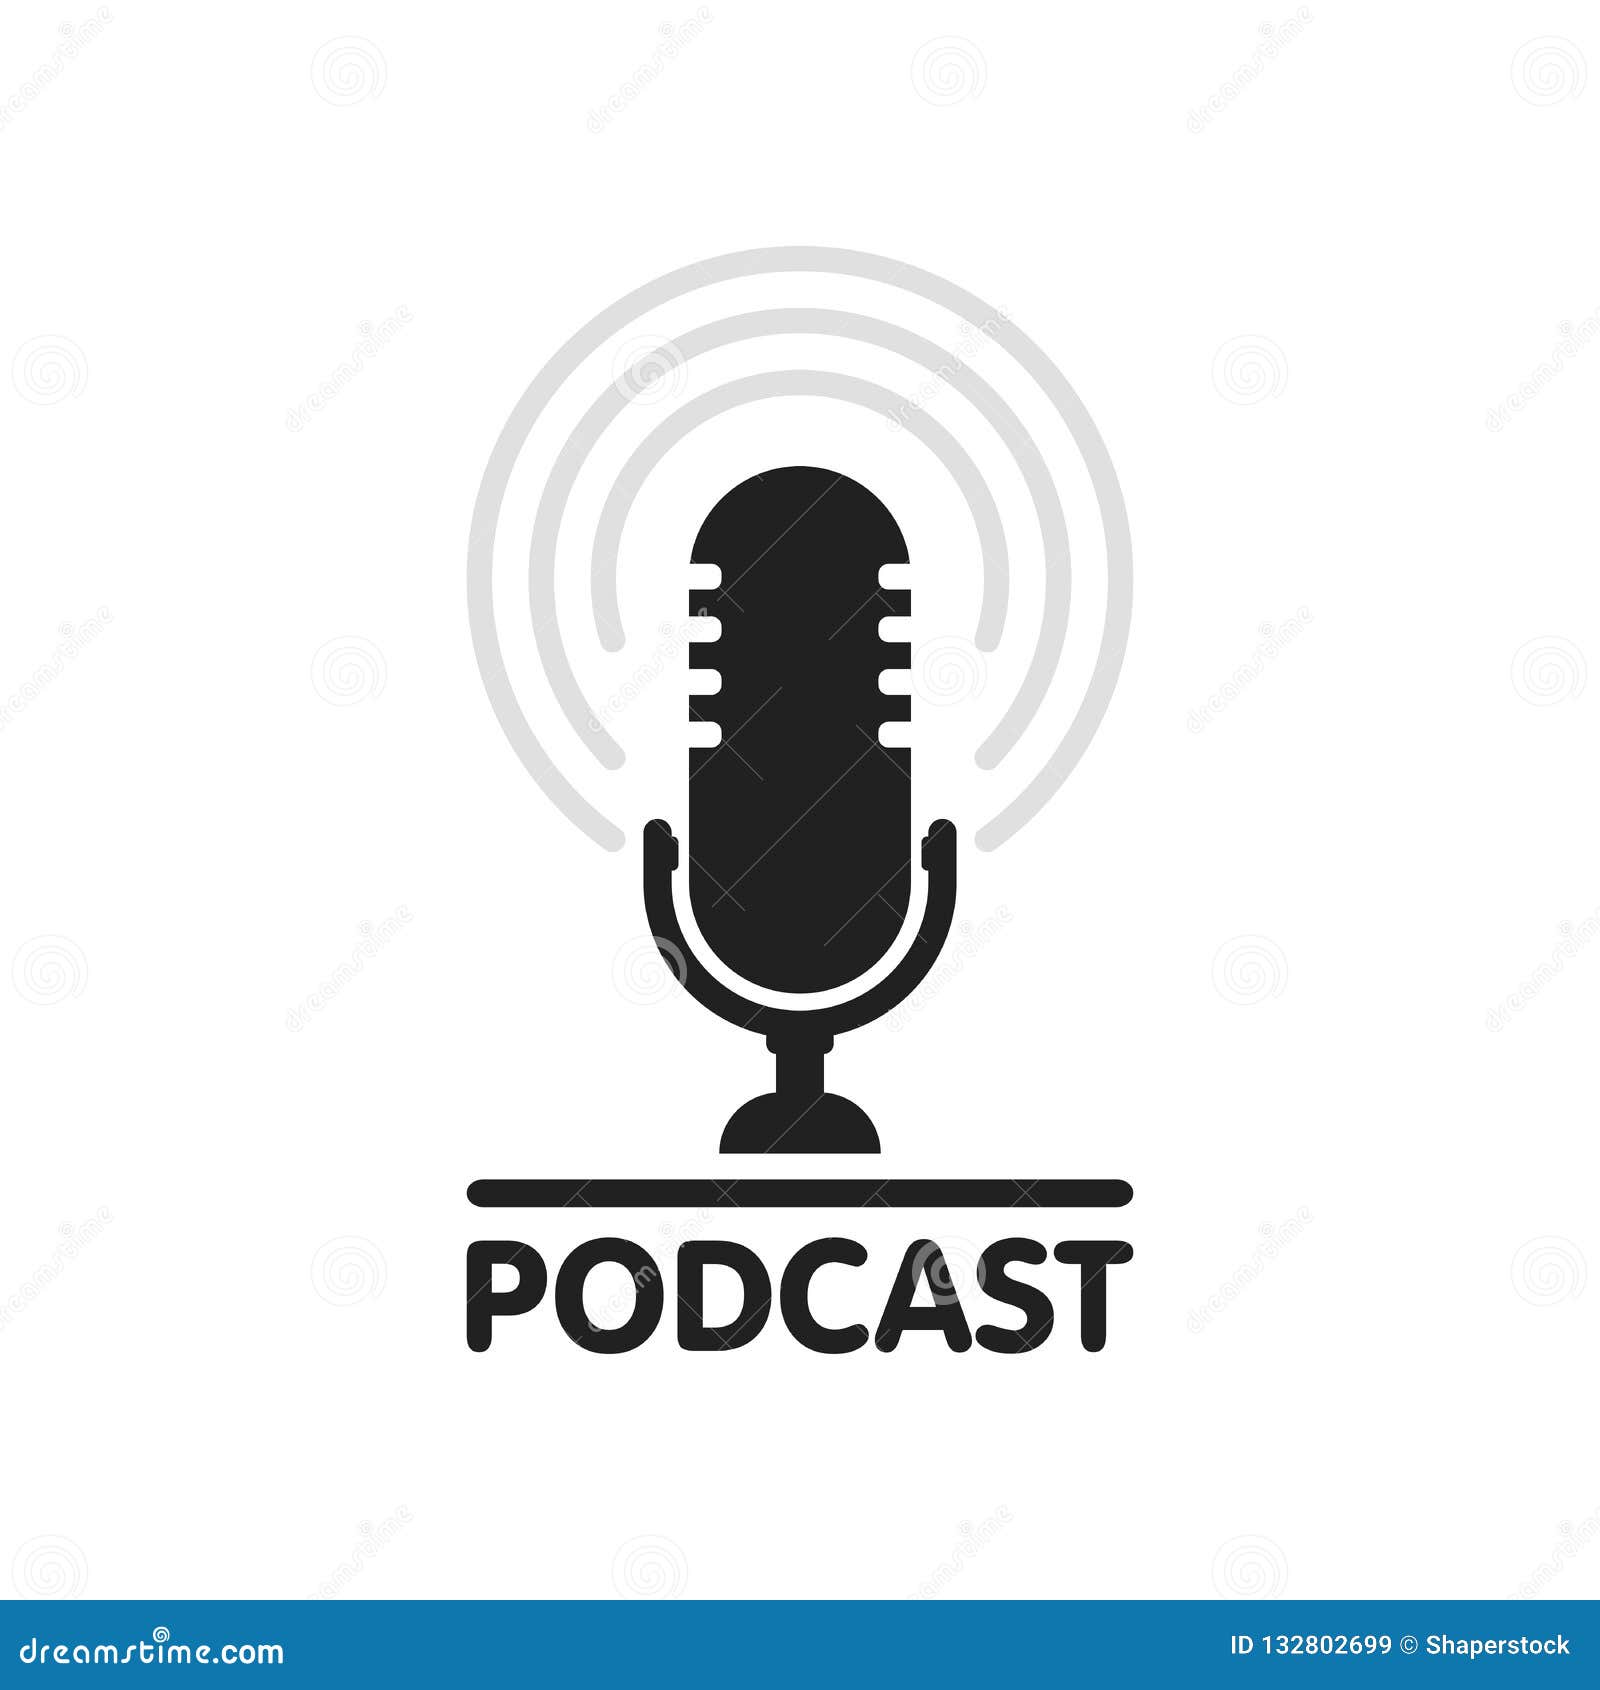 podcast radio icon . studio table microphone with broadcast text podcast. webcast audio record concept logo